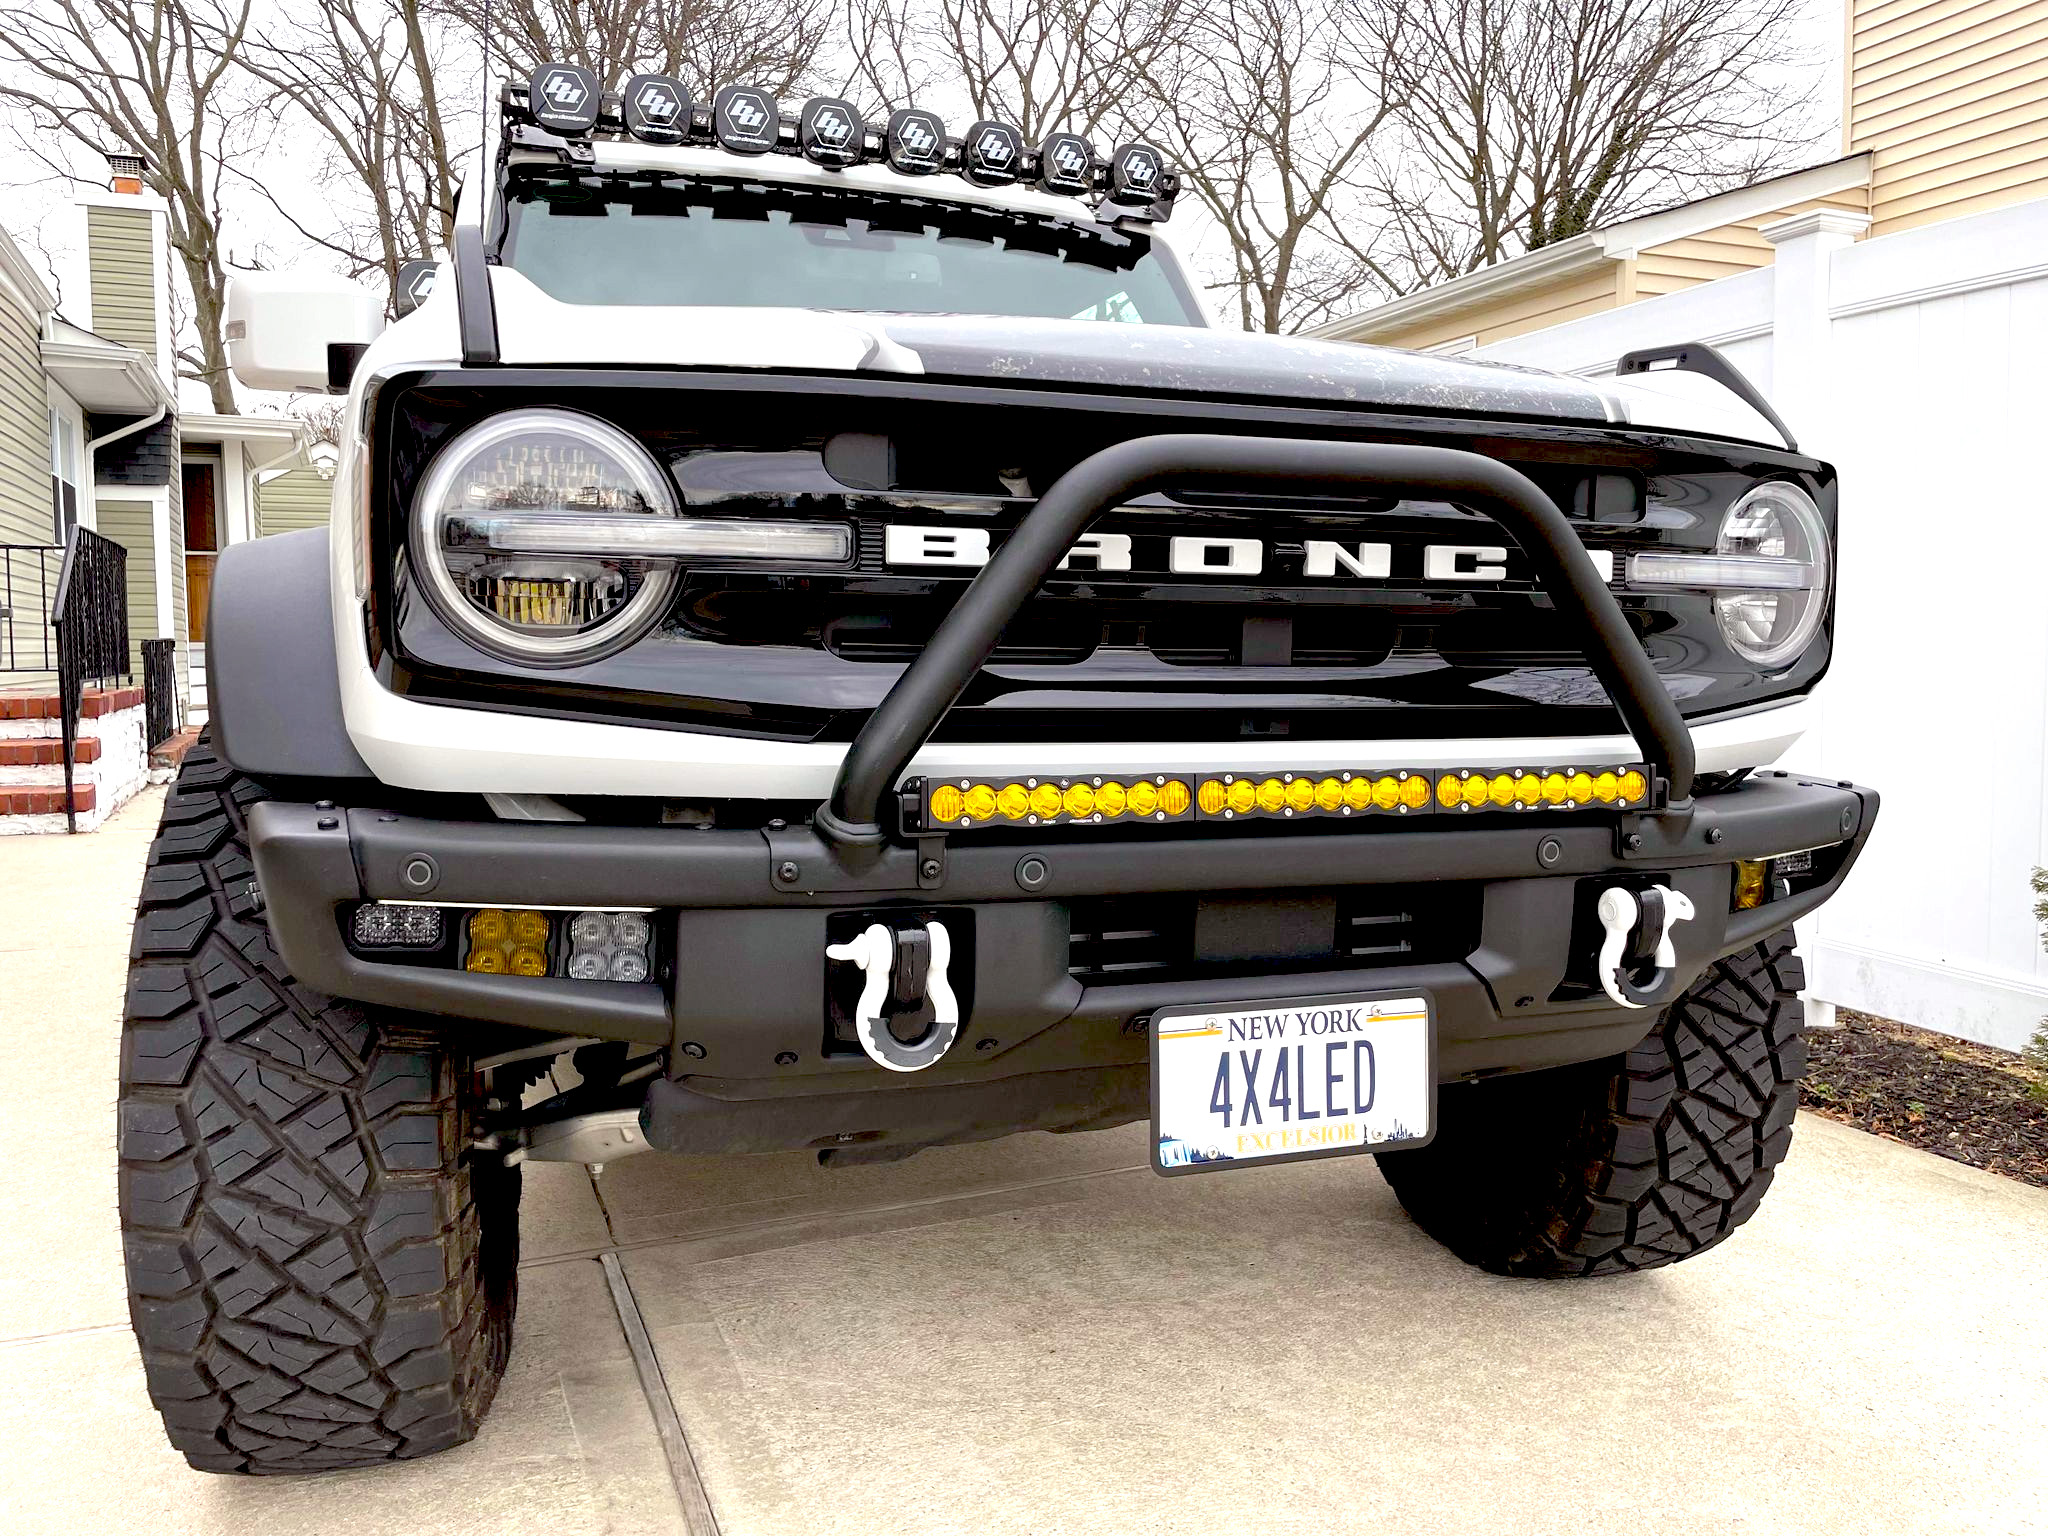 Ford Bronco Now Available: KR Off-Road 30" Light Bar Bumper Mount for 2021+ Ford Bronco Safari 3